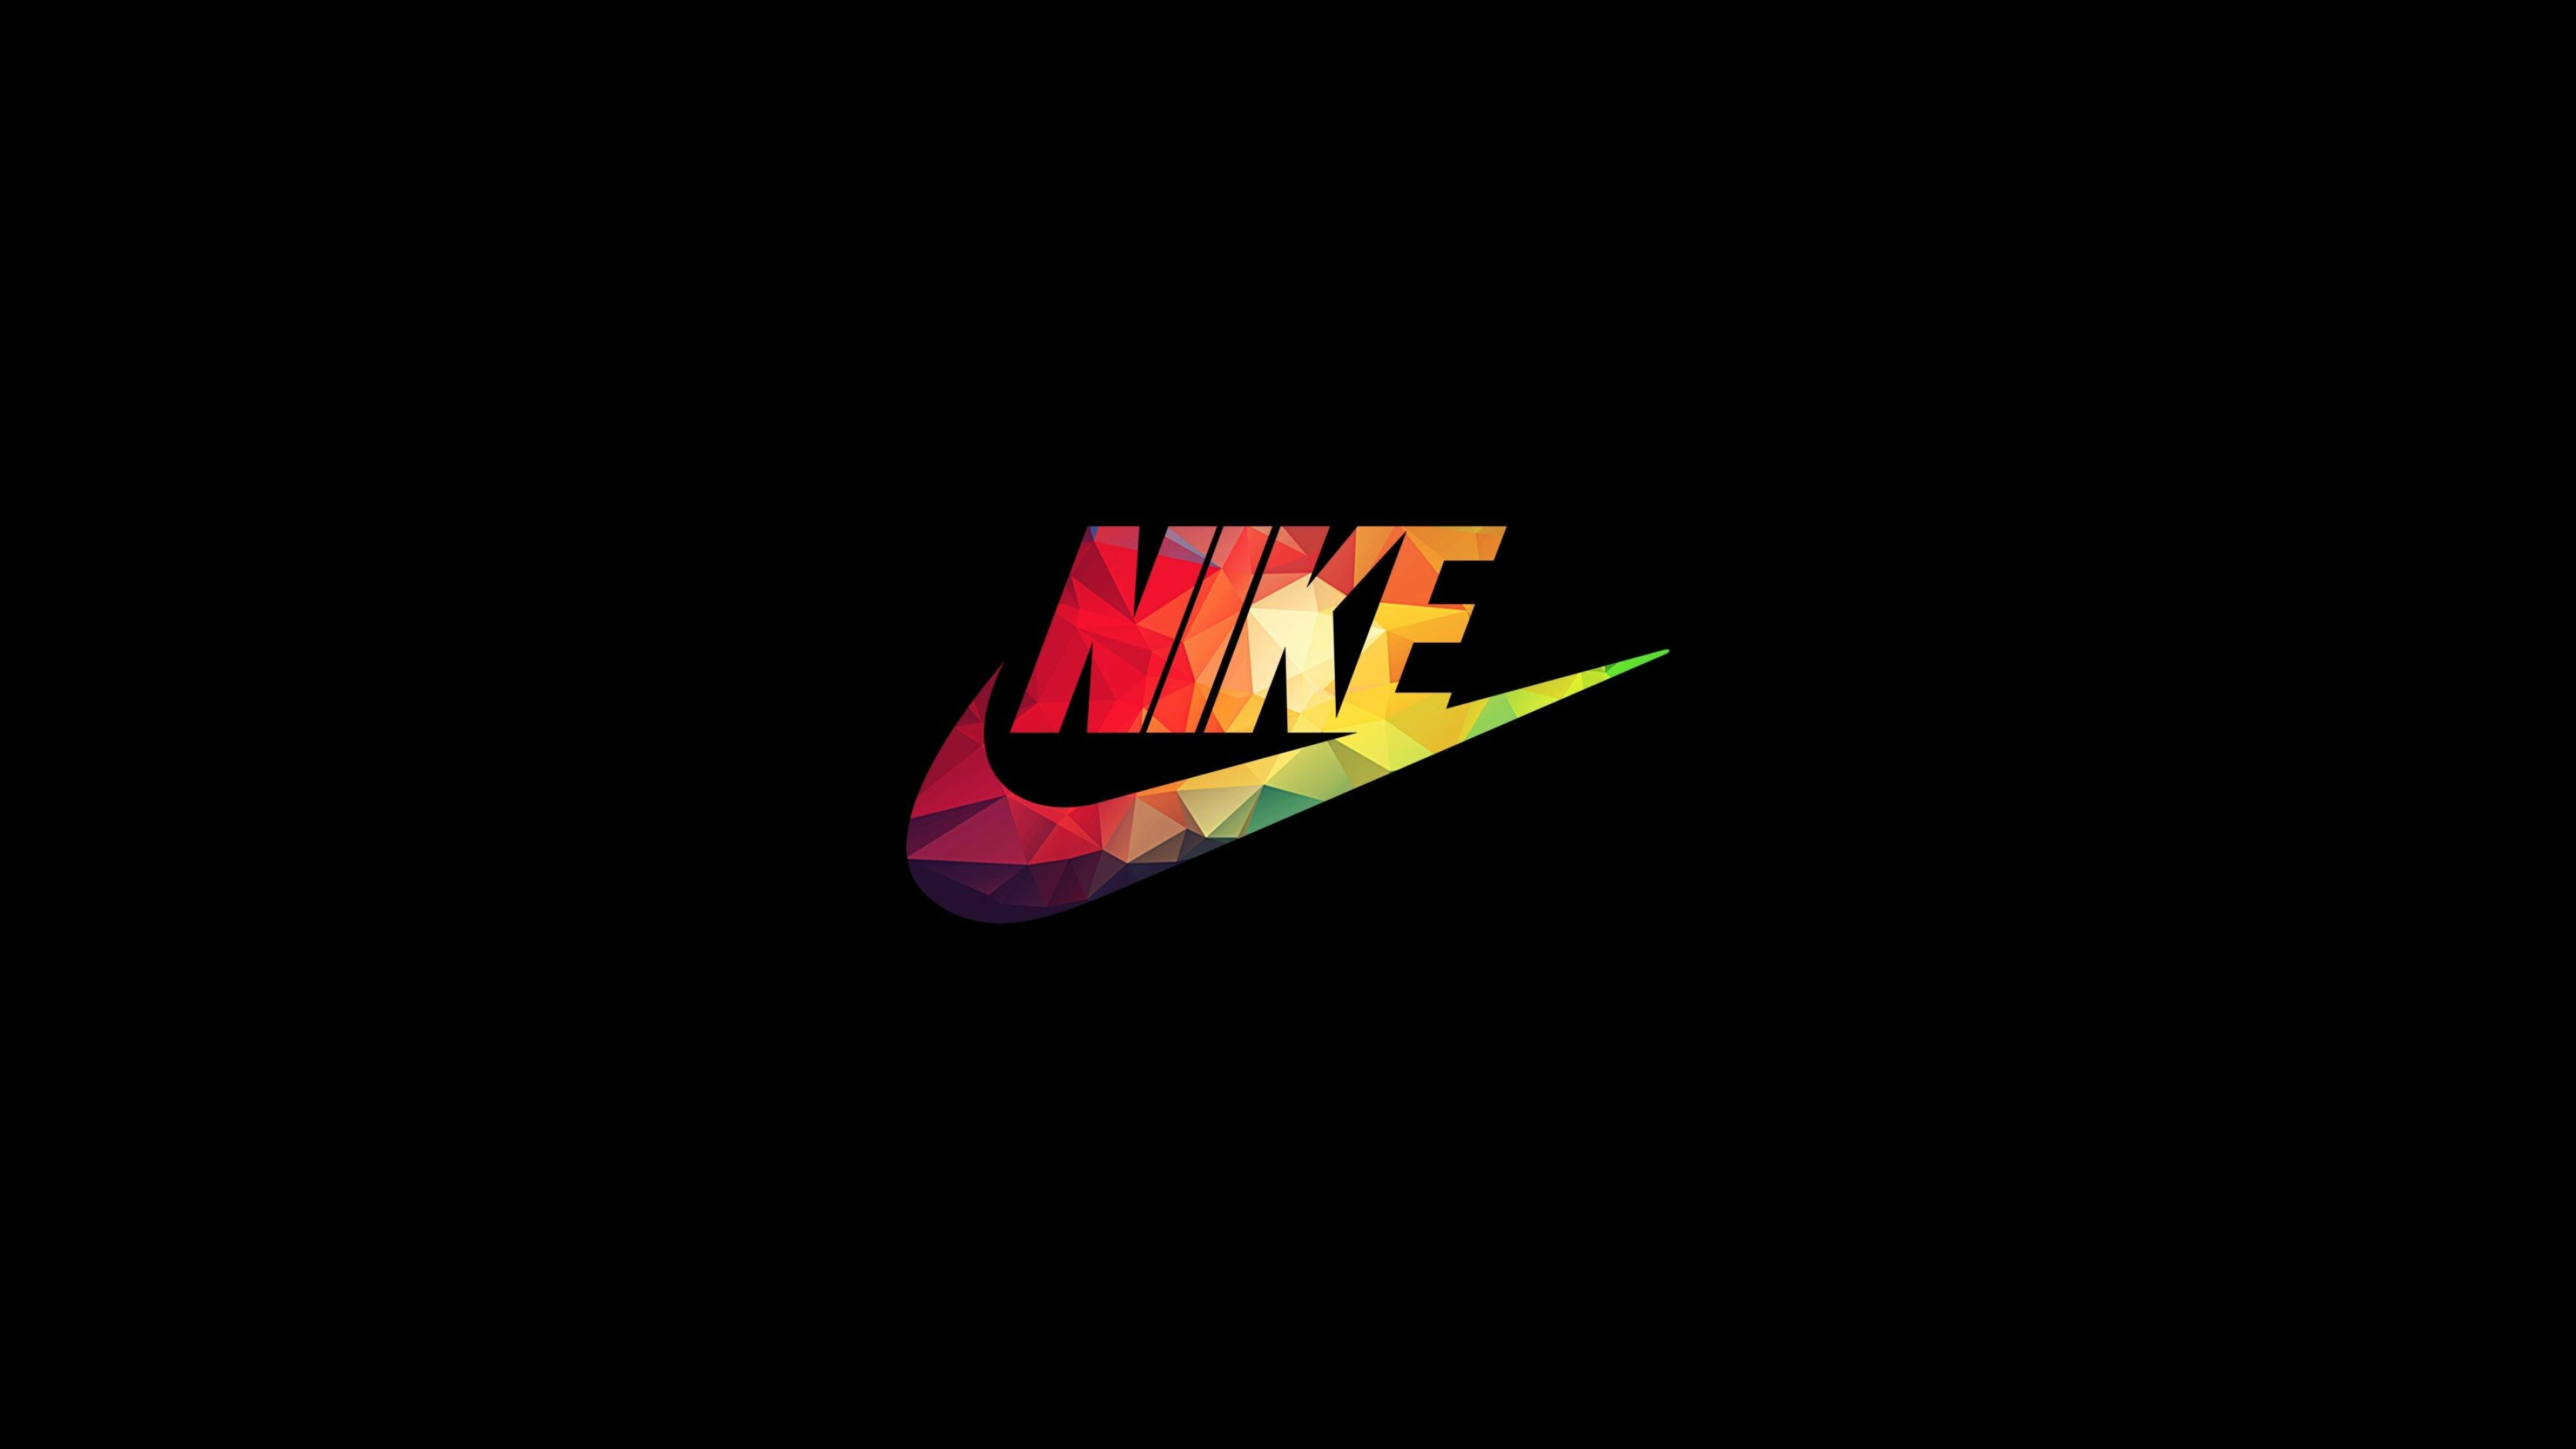 Nike: An American multinational corporation, Founded in 1964 as Blue Ribbon Sports. 3840x2160 4K Background.